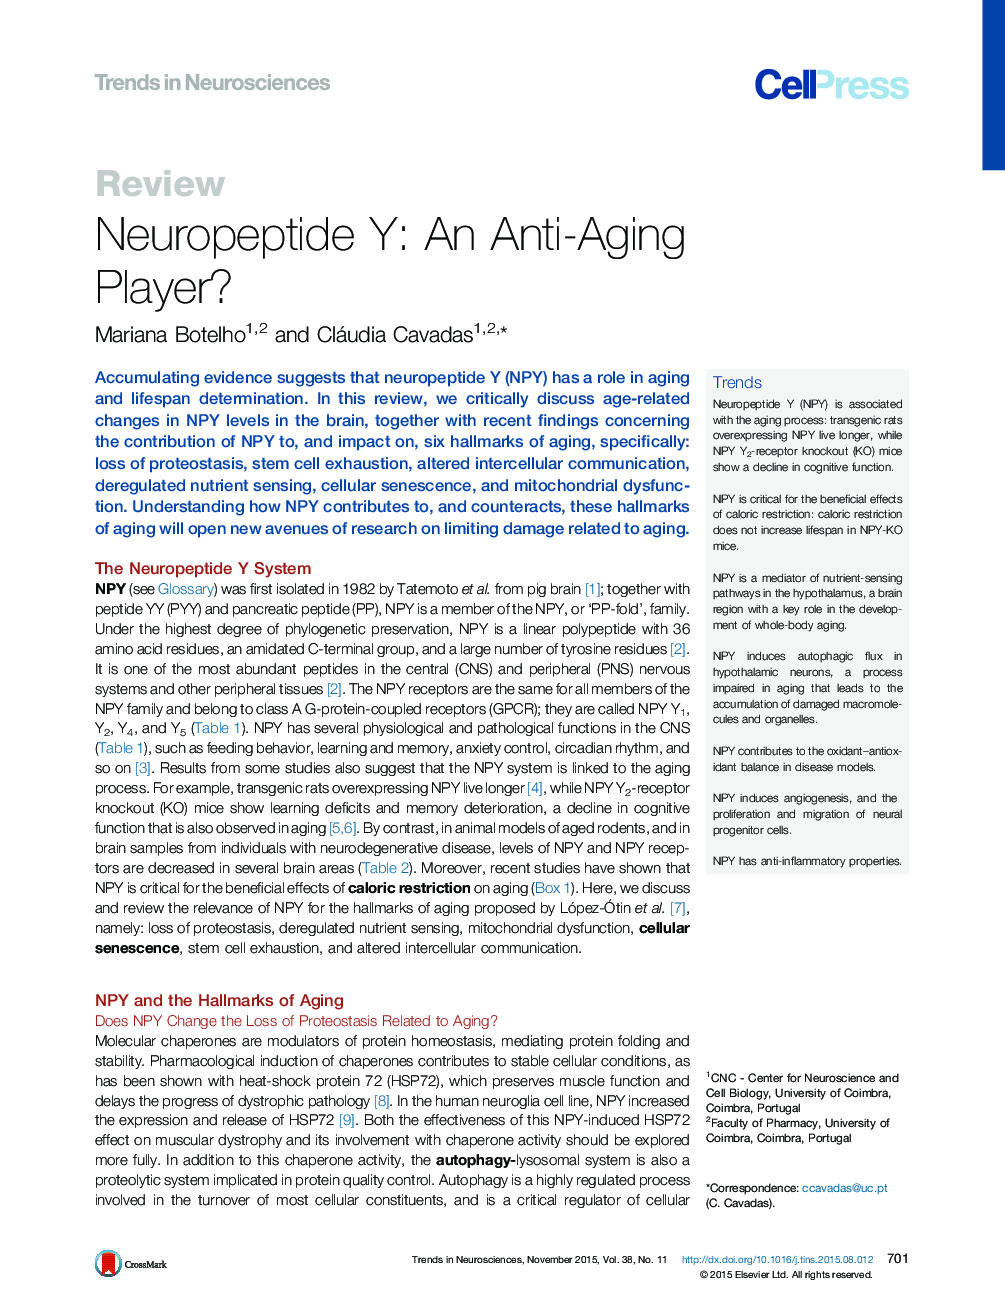 Neuropeptide Y: An Anti-Aging Player?